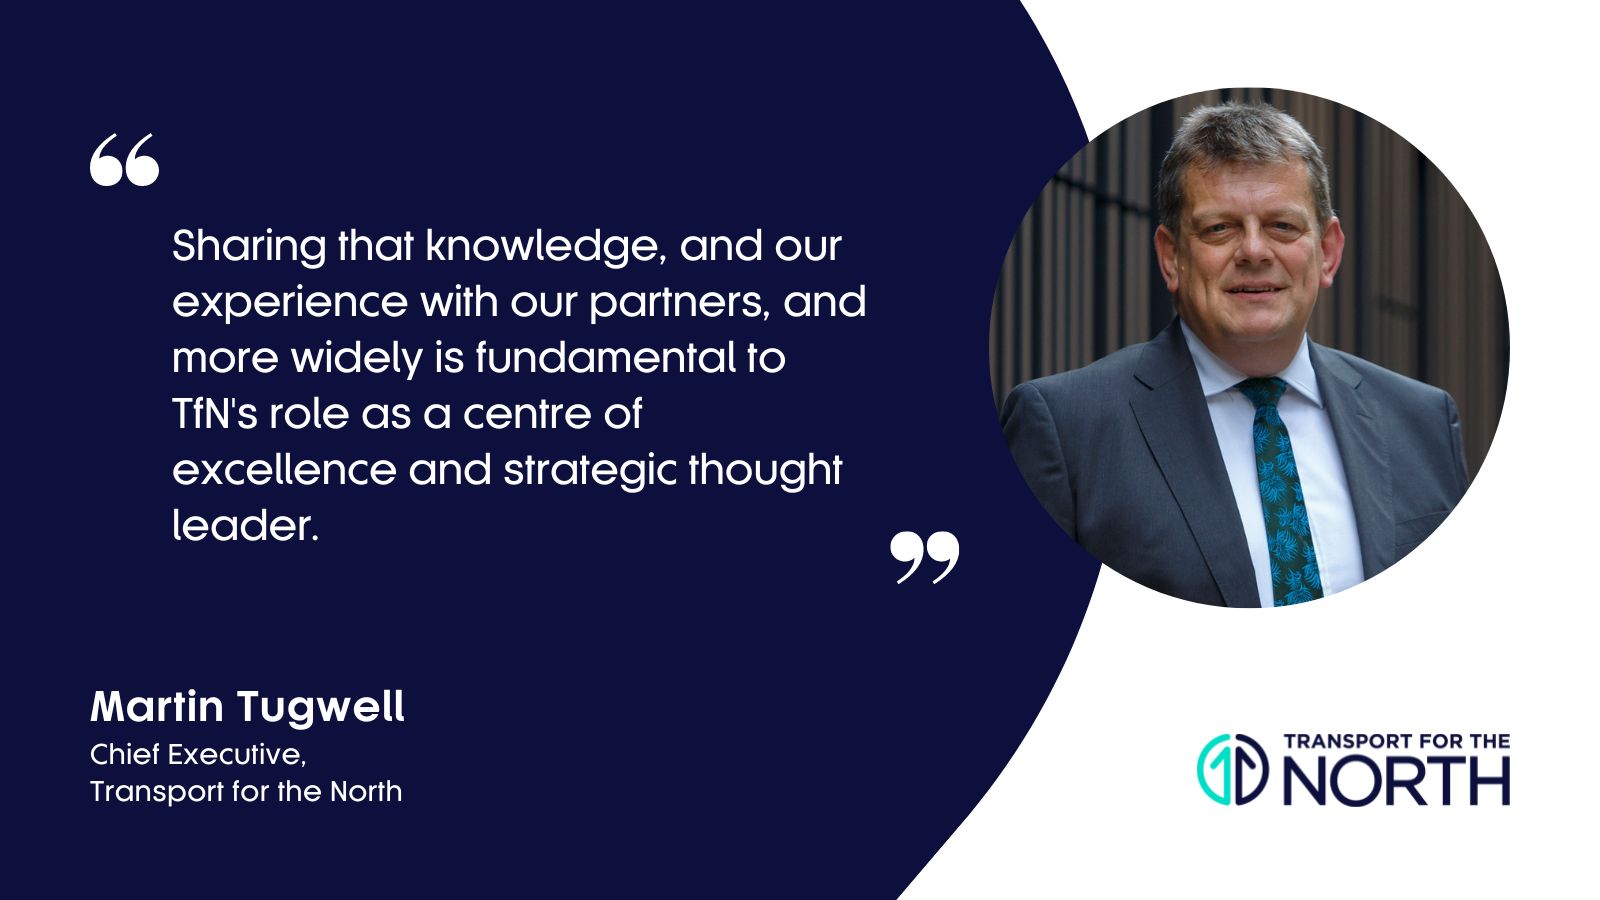 Transport for the North Chief Executive on the importance of knowledge sharing